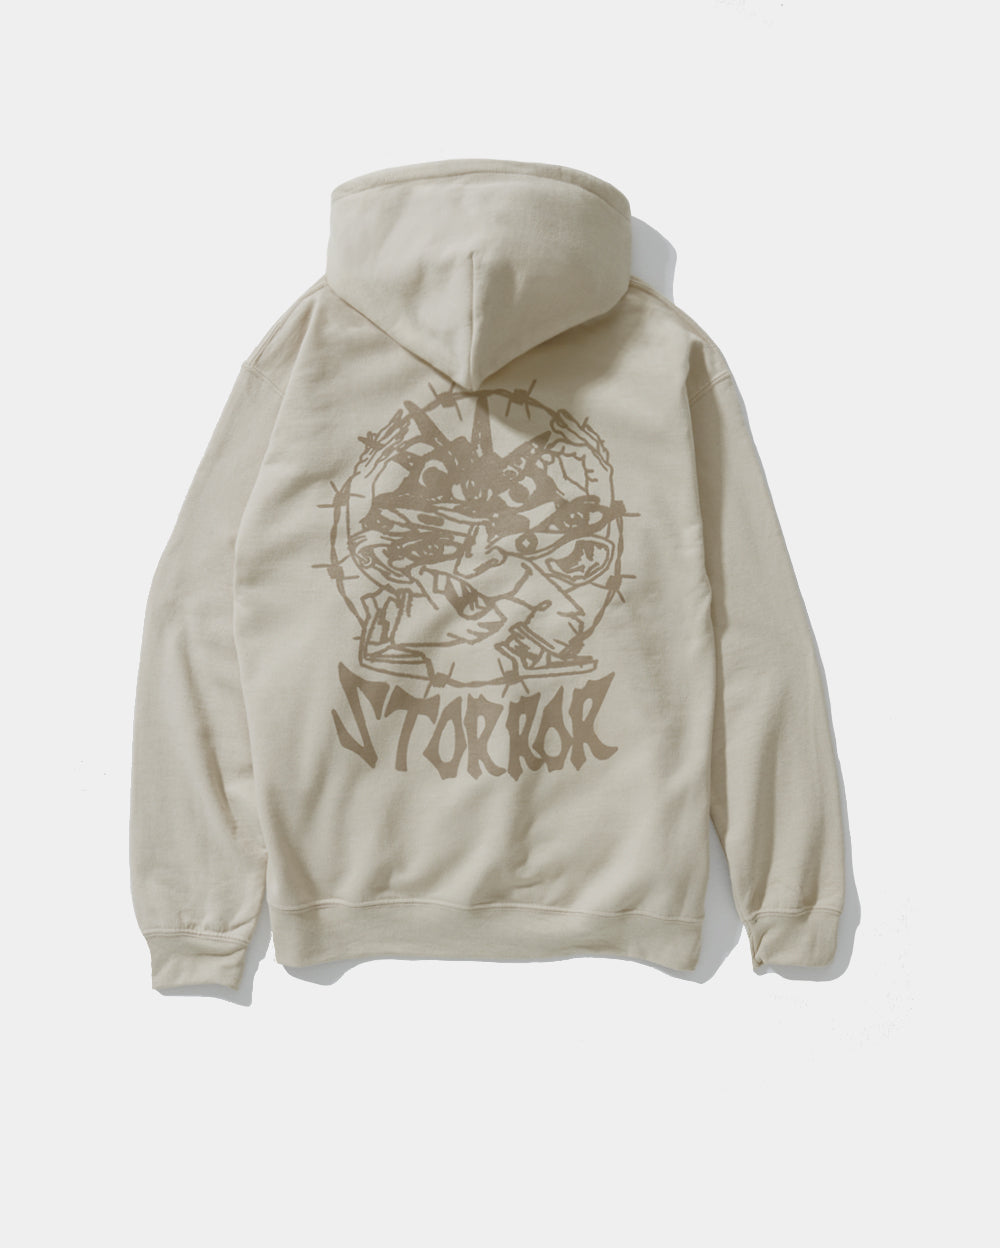 STORROR barbed oversized hoodie. Back. Parkour Clothing. Functional Streetwear. 